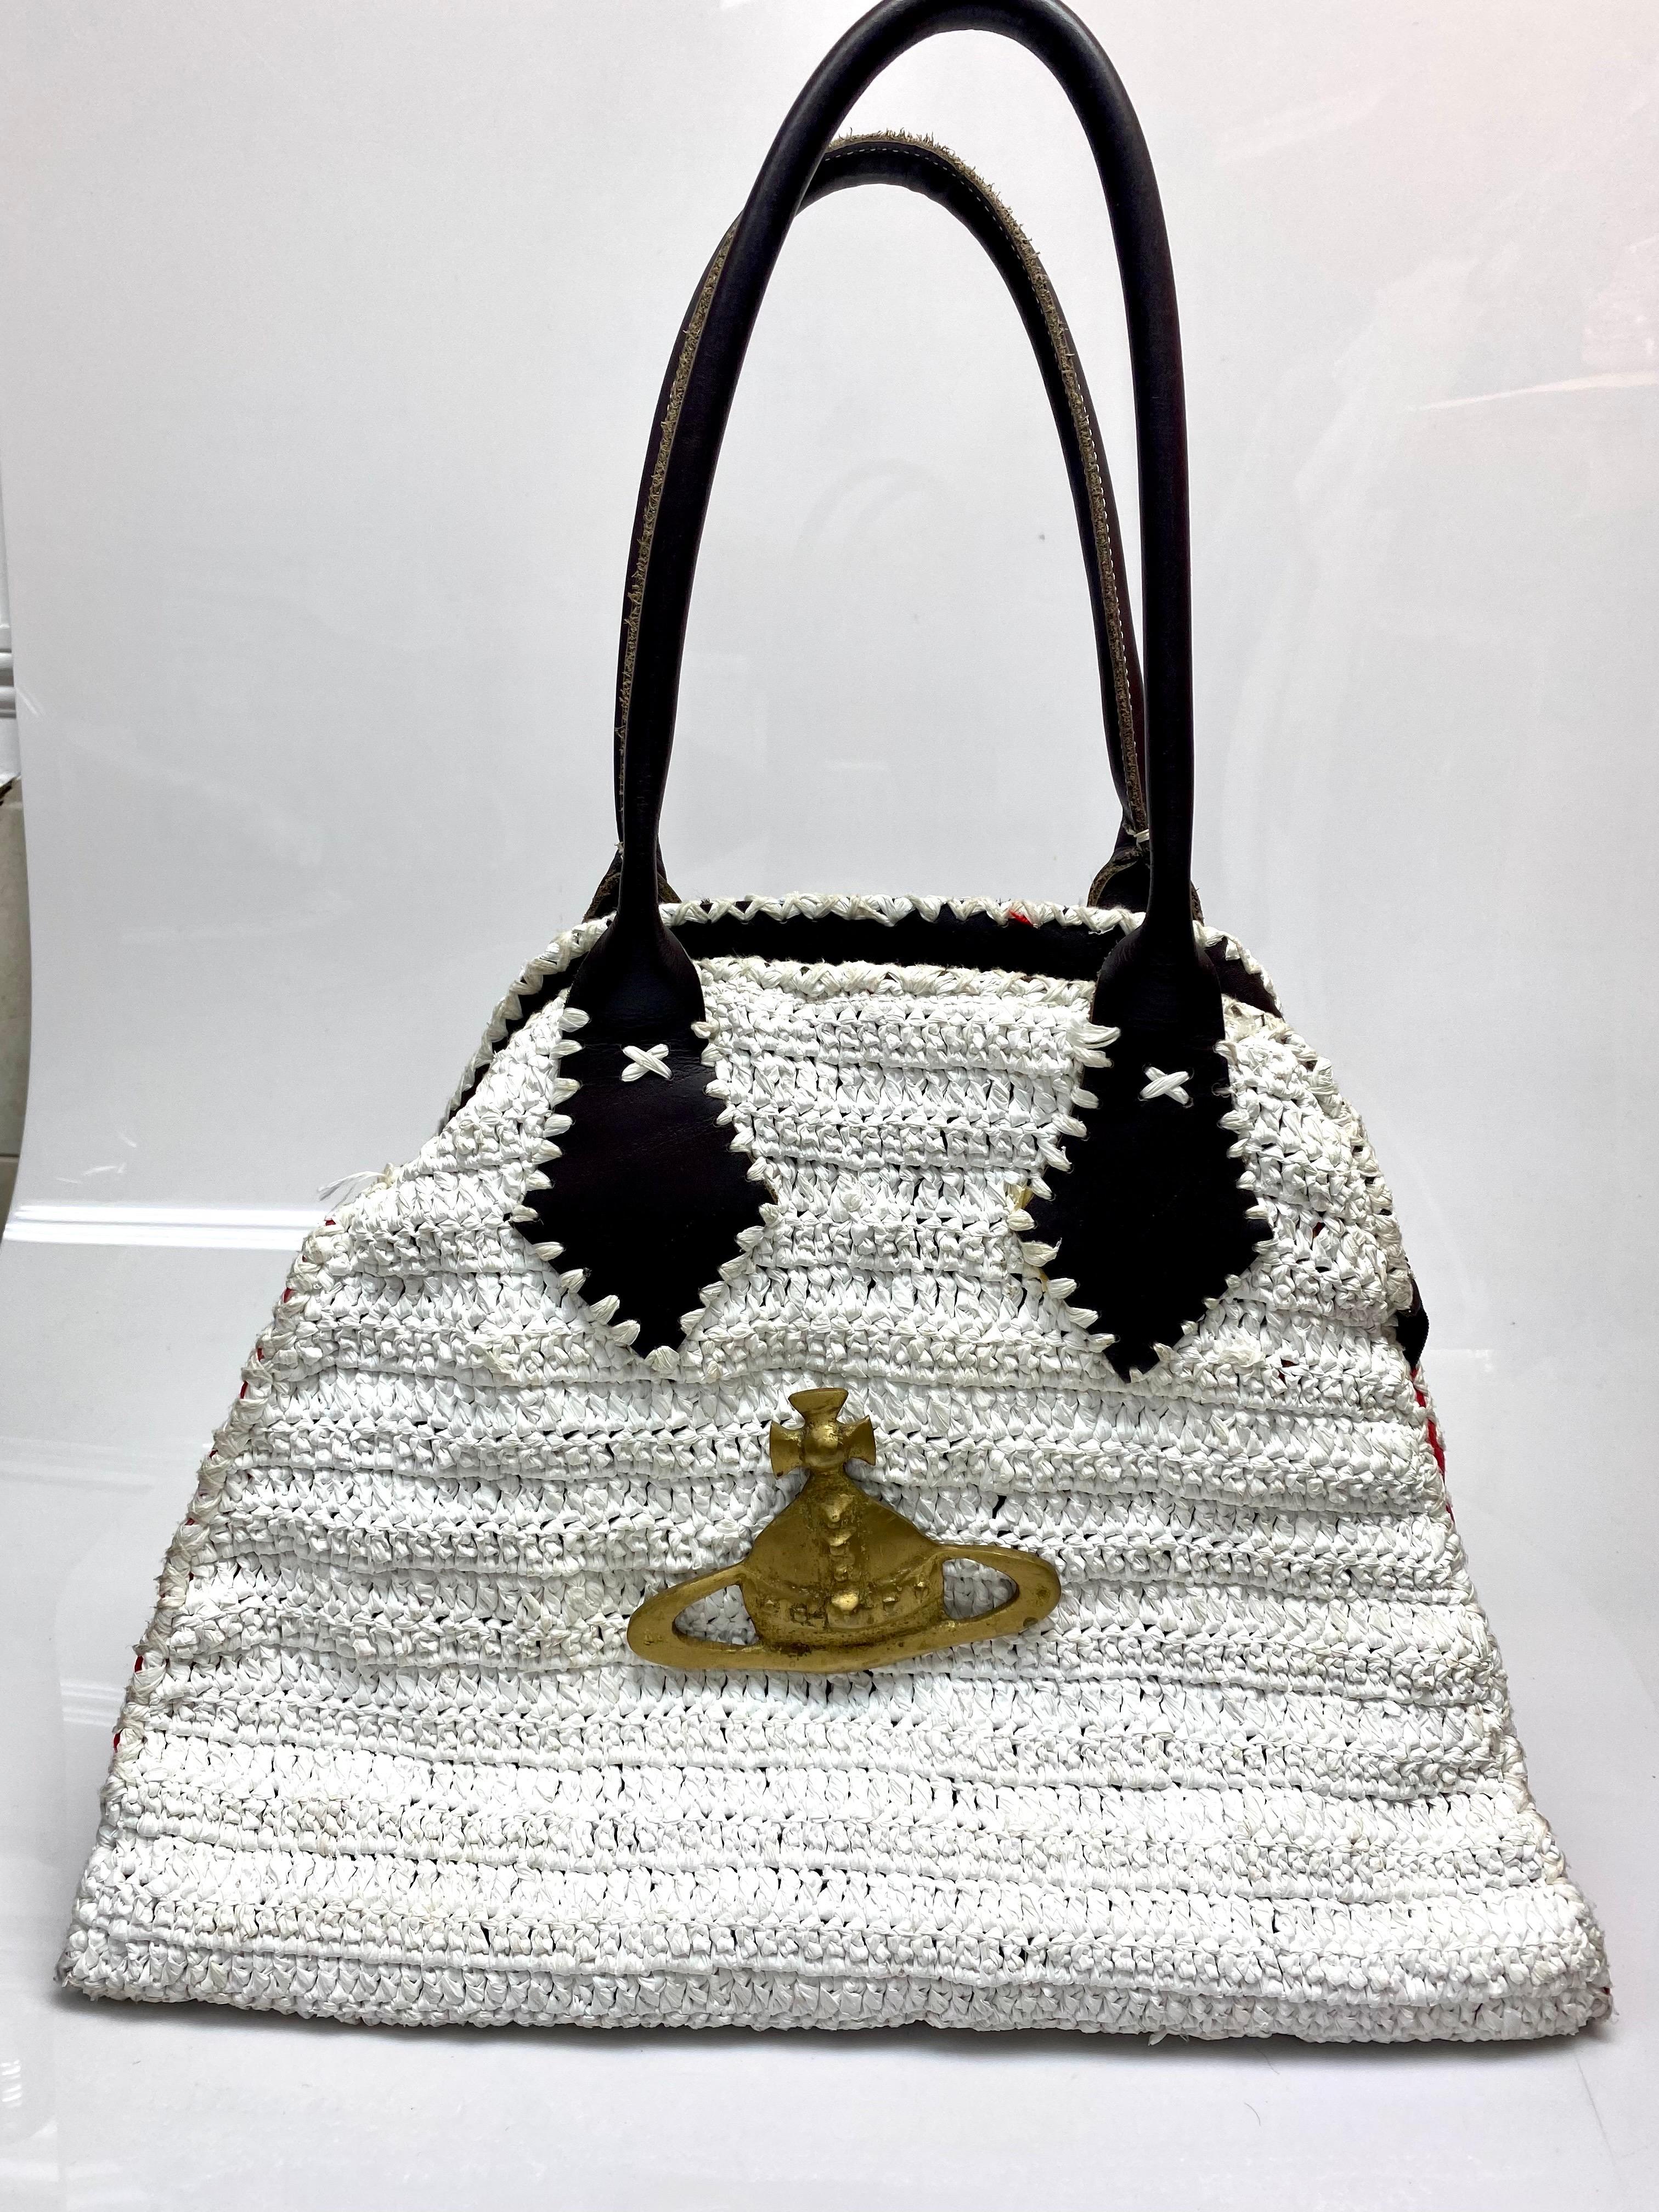 Vivienne Westwood White Crochet Bag. This oversized bag by Vivienne Westwood is the perfect luxury tote to carry all of your necessities. The piece features crotchet detailing, red leather sides, brown leather handles with white stitching, zipper